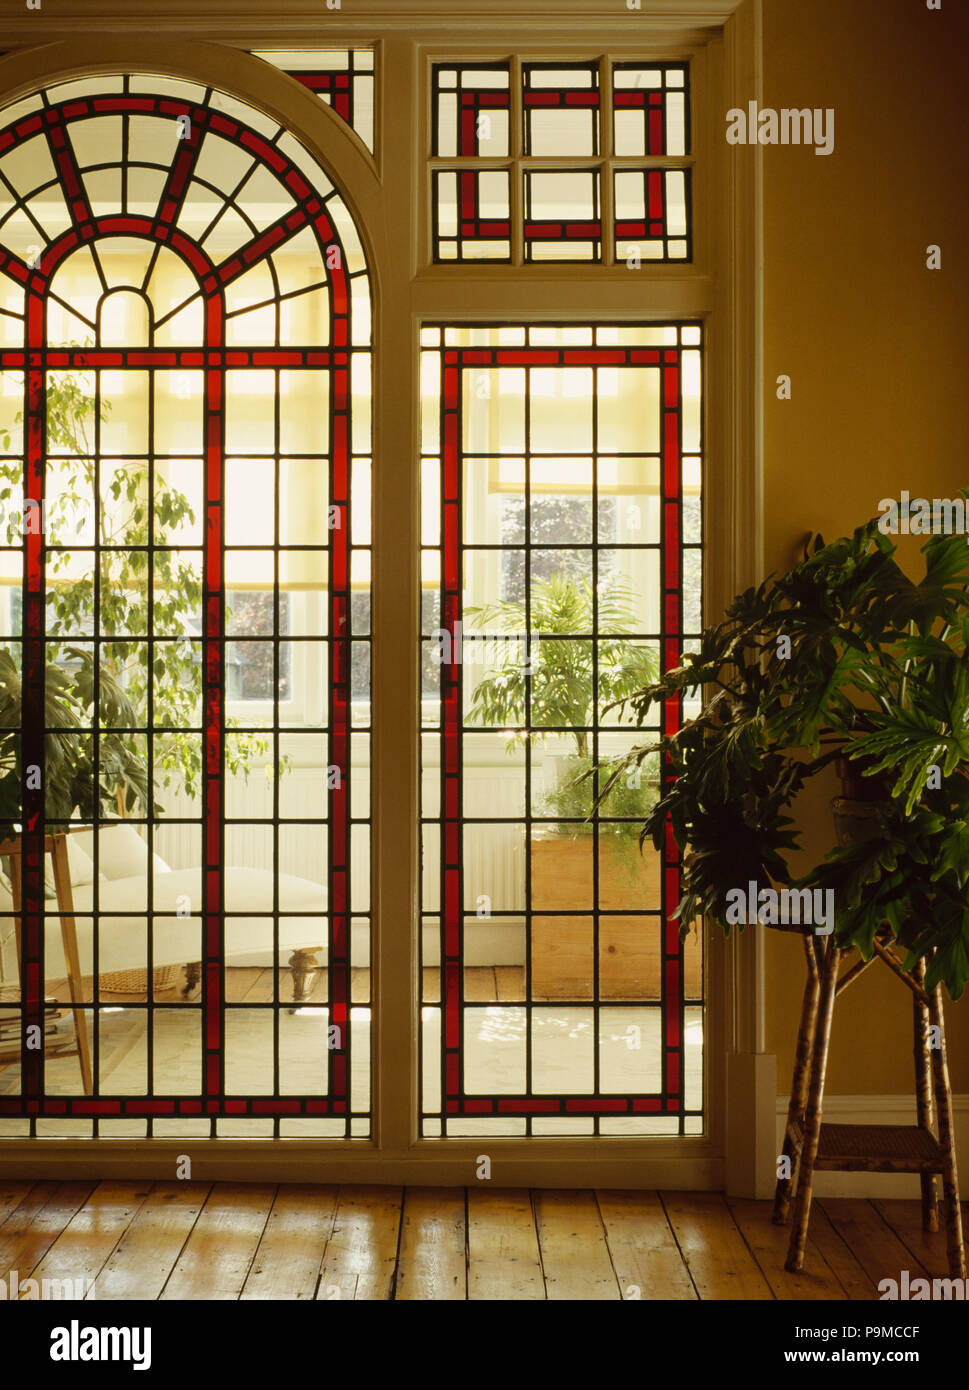 Arched glass door and windows with red stained glass panels in traditional hall Stock Photo